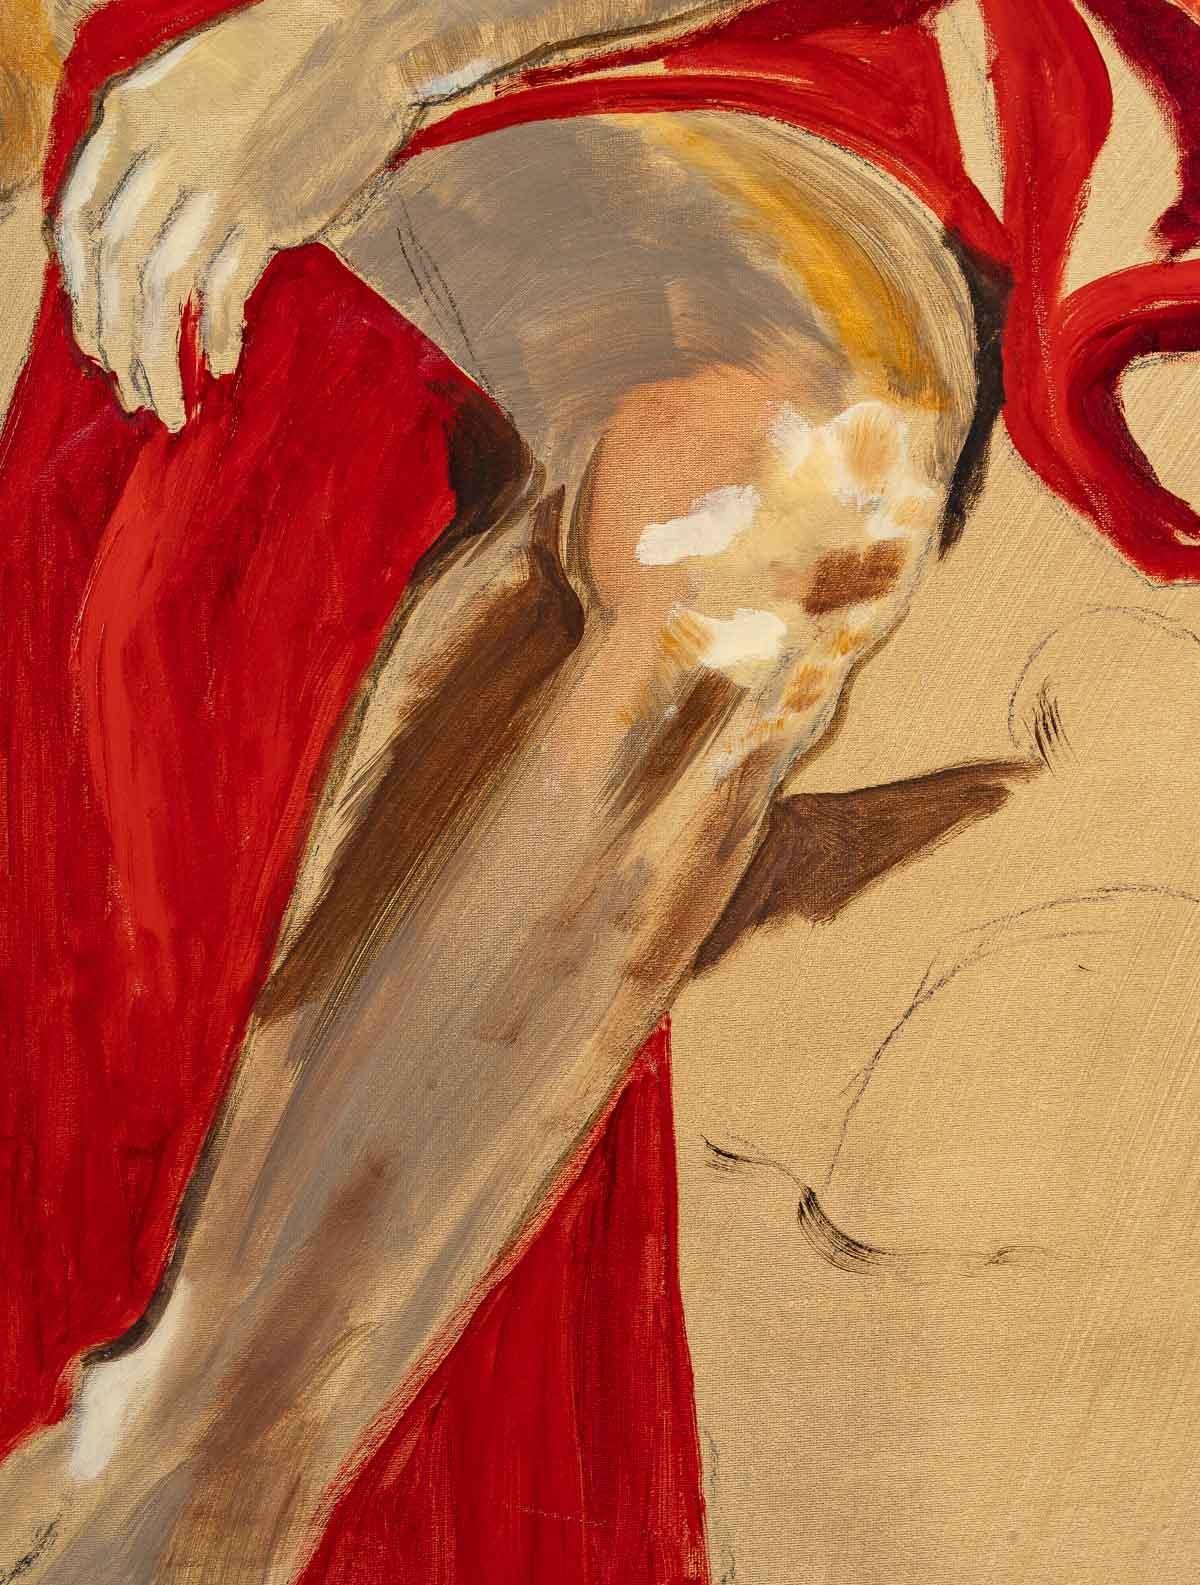 Painting of a man, 20th century.
Large painting of an old-fashioned man in a red cape, 20th century, unsigned, unframed.
Measures: H: 100 cm, W: 65 cm, D: 2.5 cm.